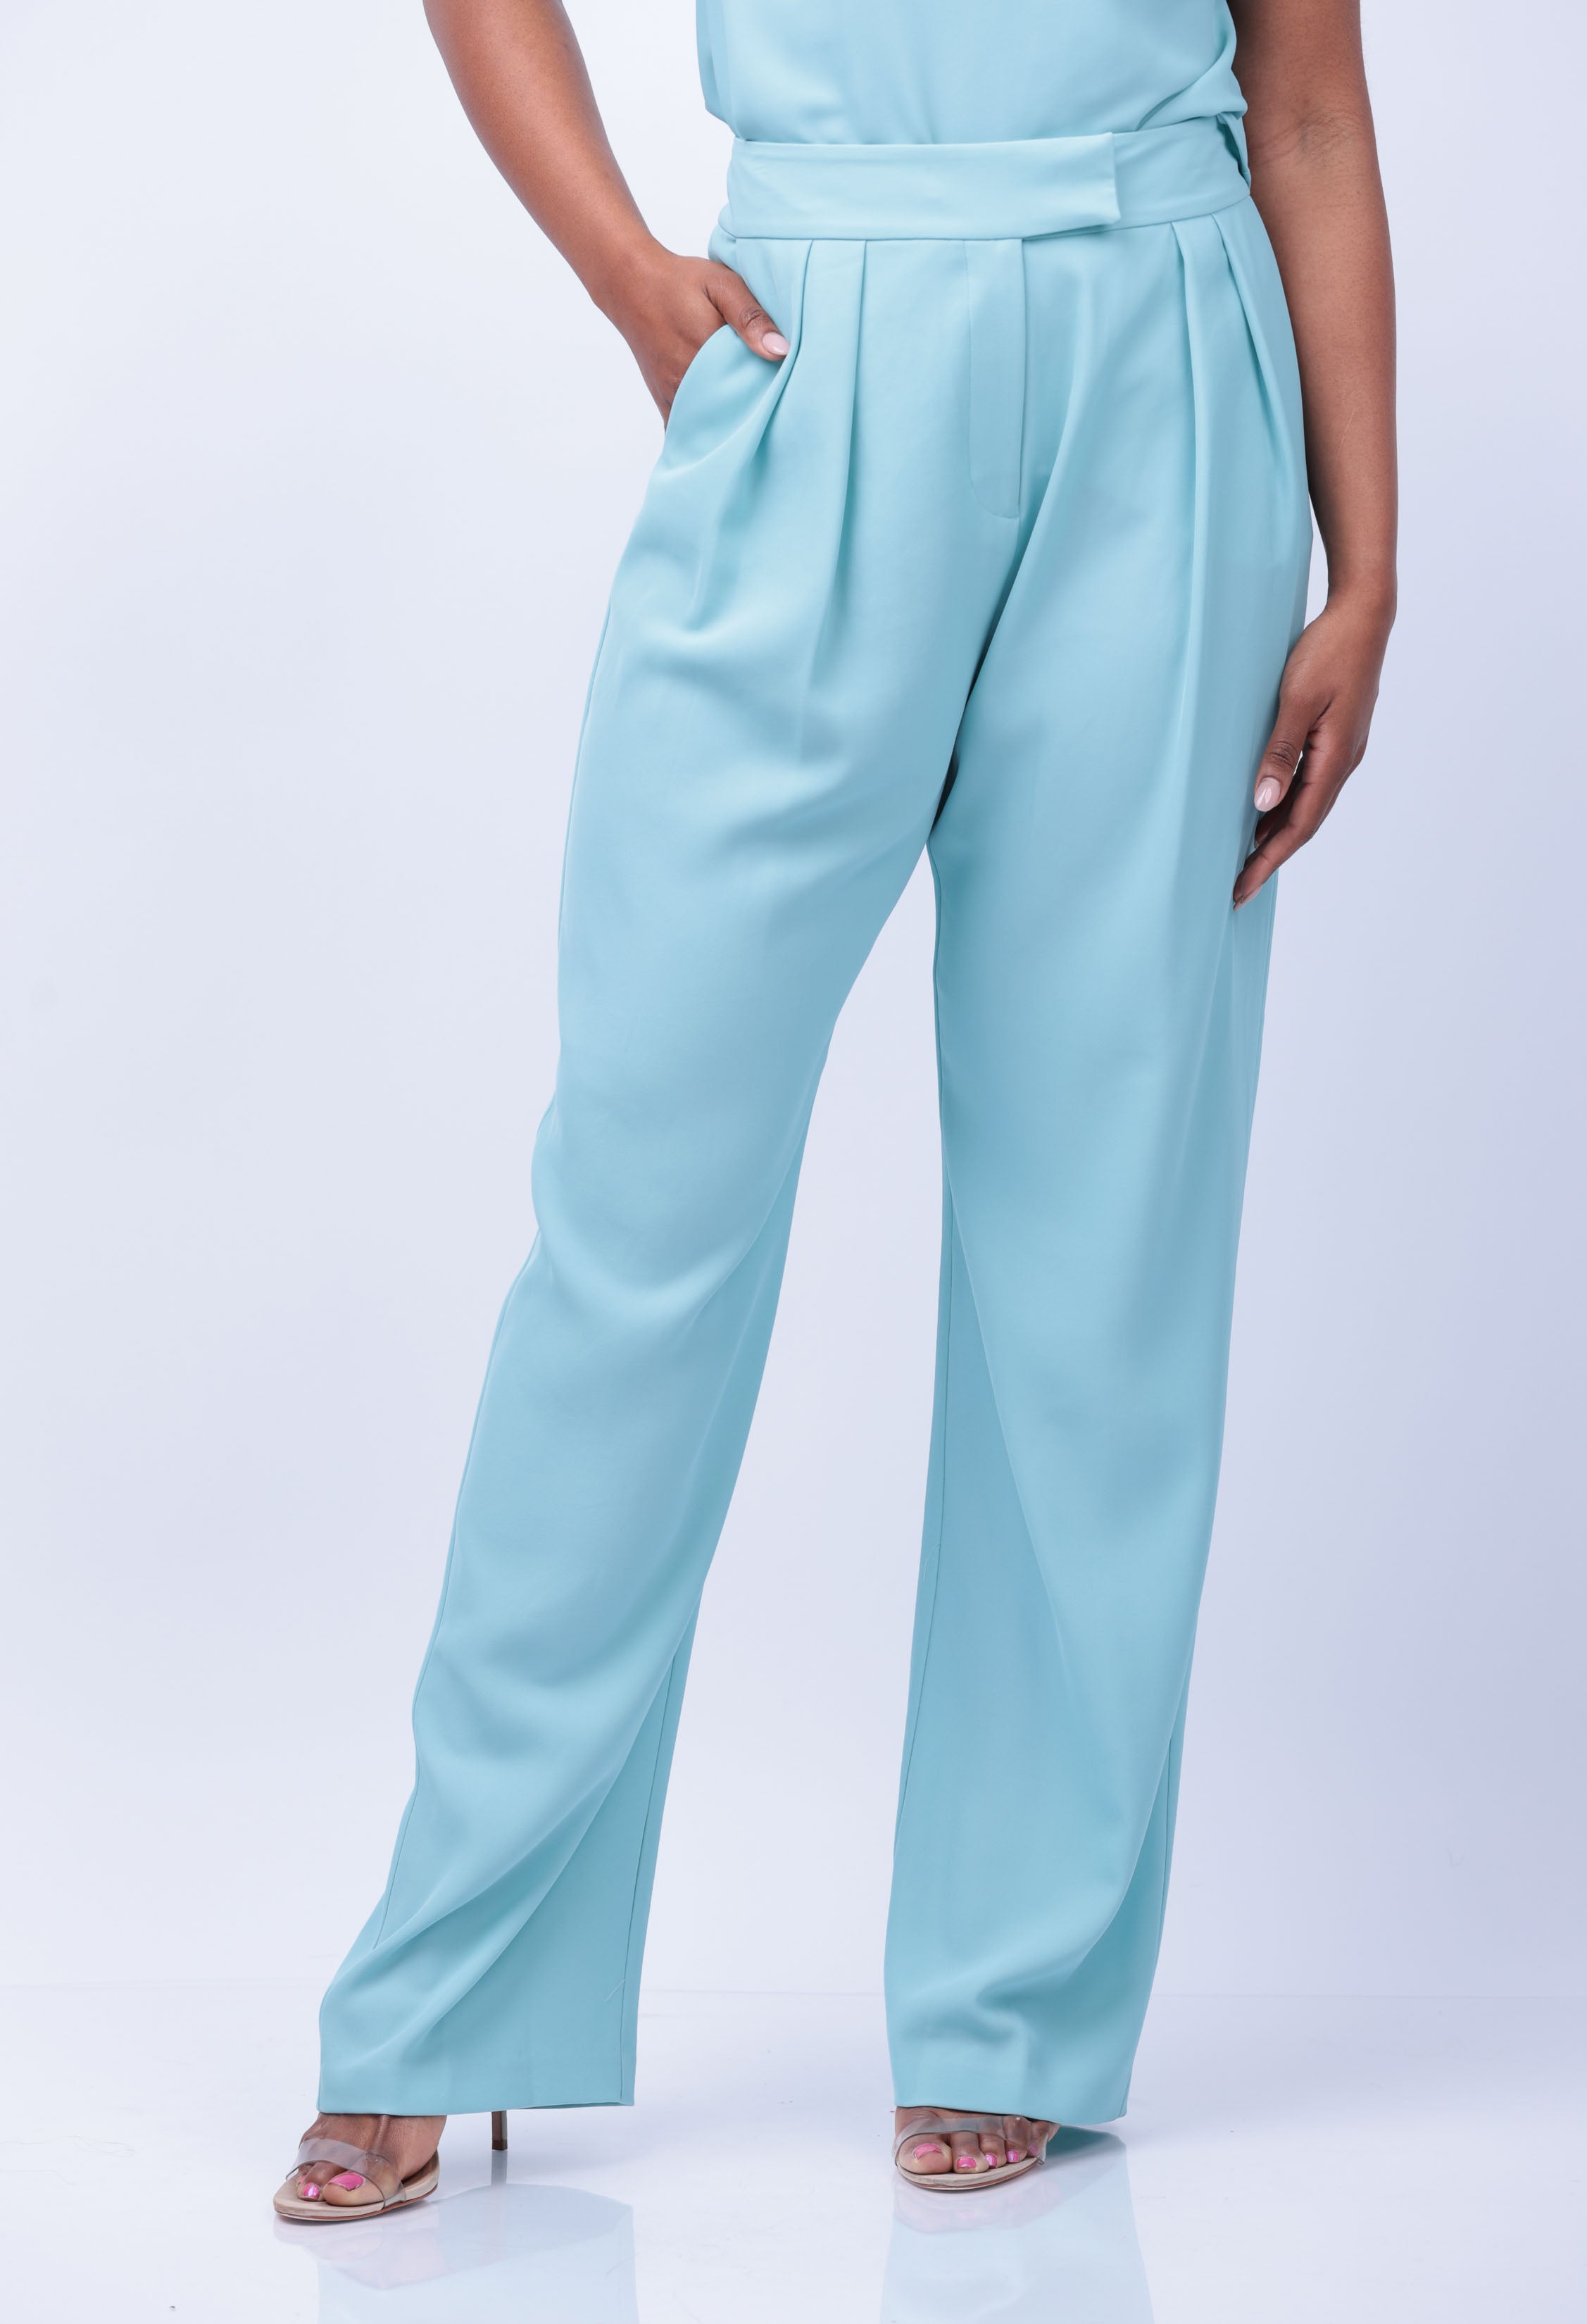 The Sei Double Pleated Trouser in Baby Blue